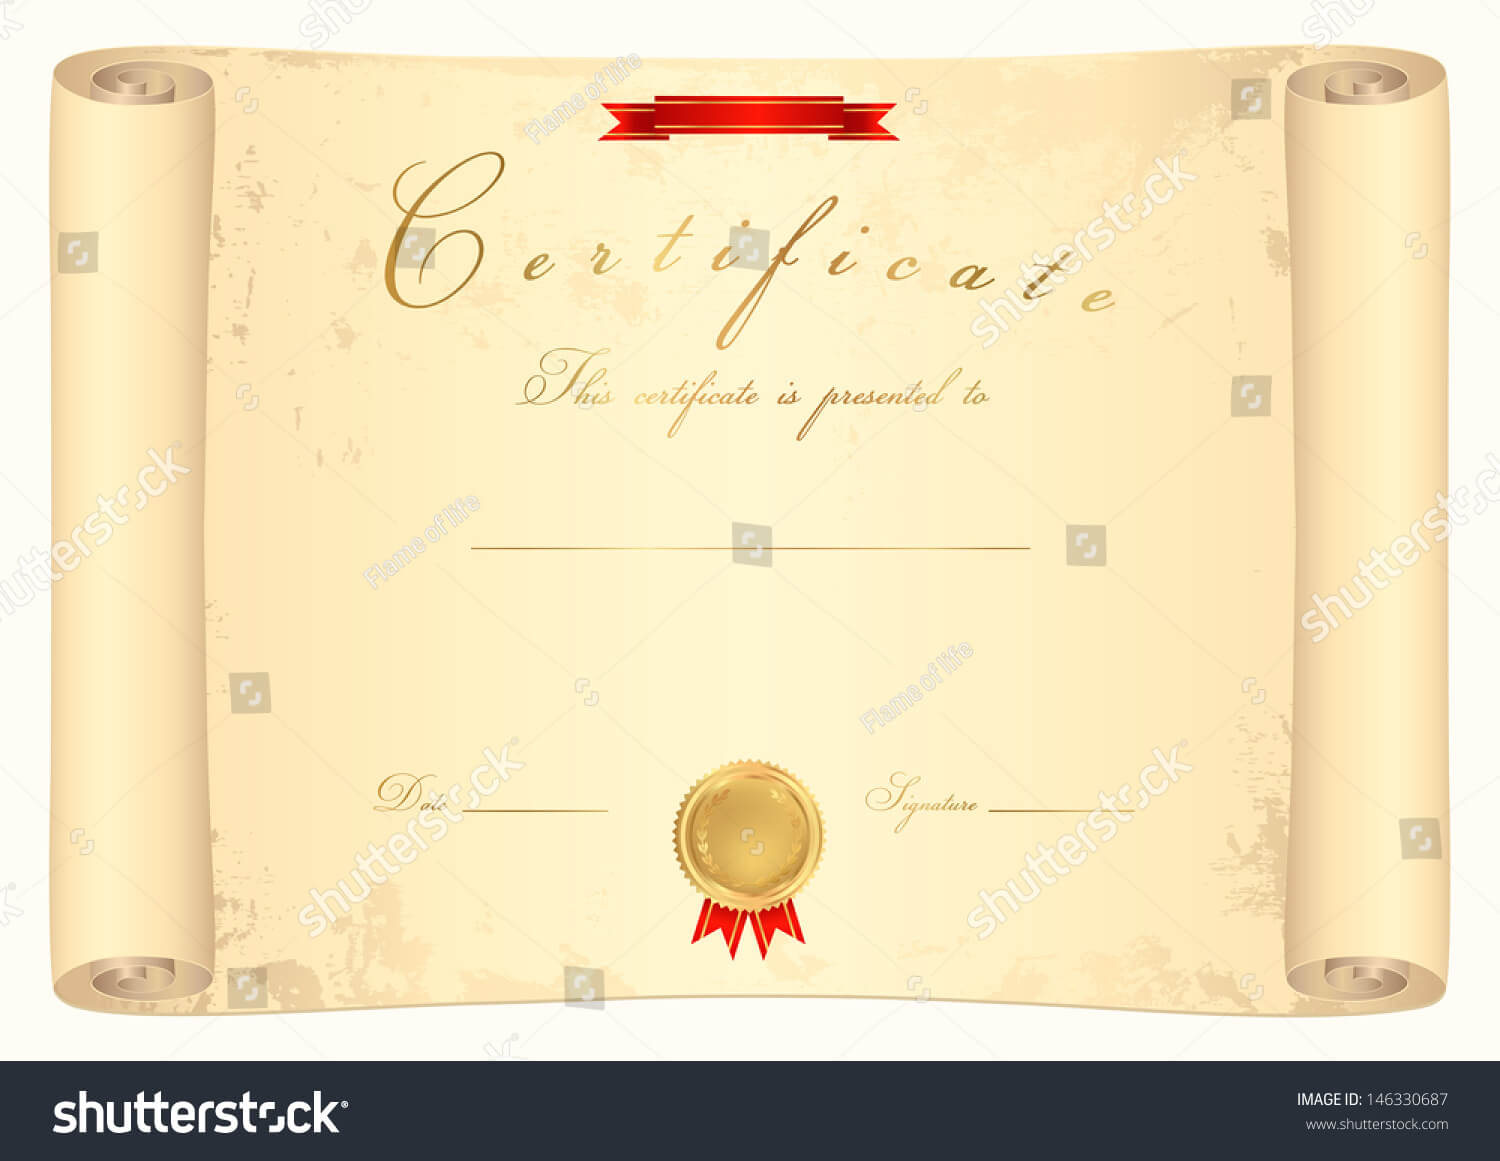 Scroll Certificate Completion Template Sample Background Inside Scroll Certificate Templates